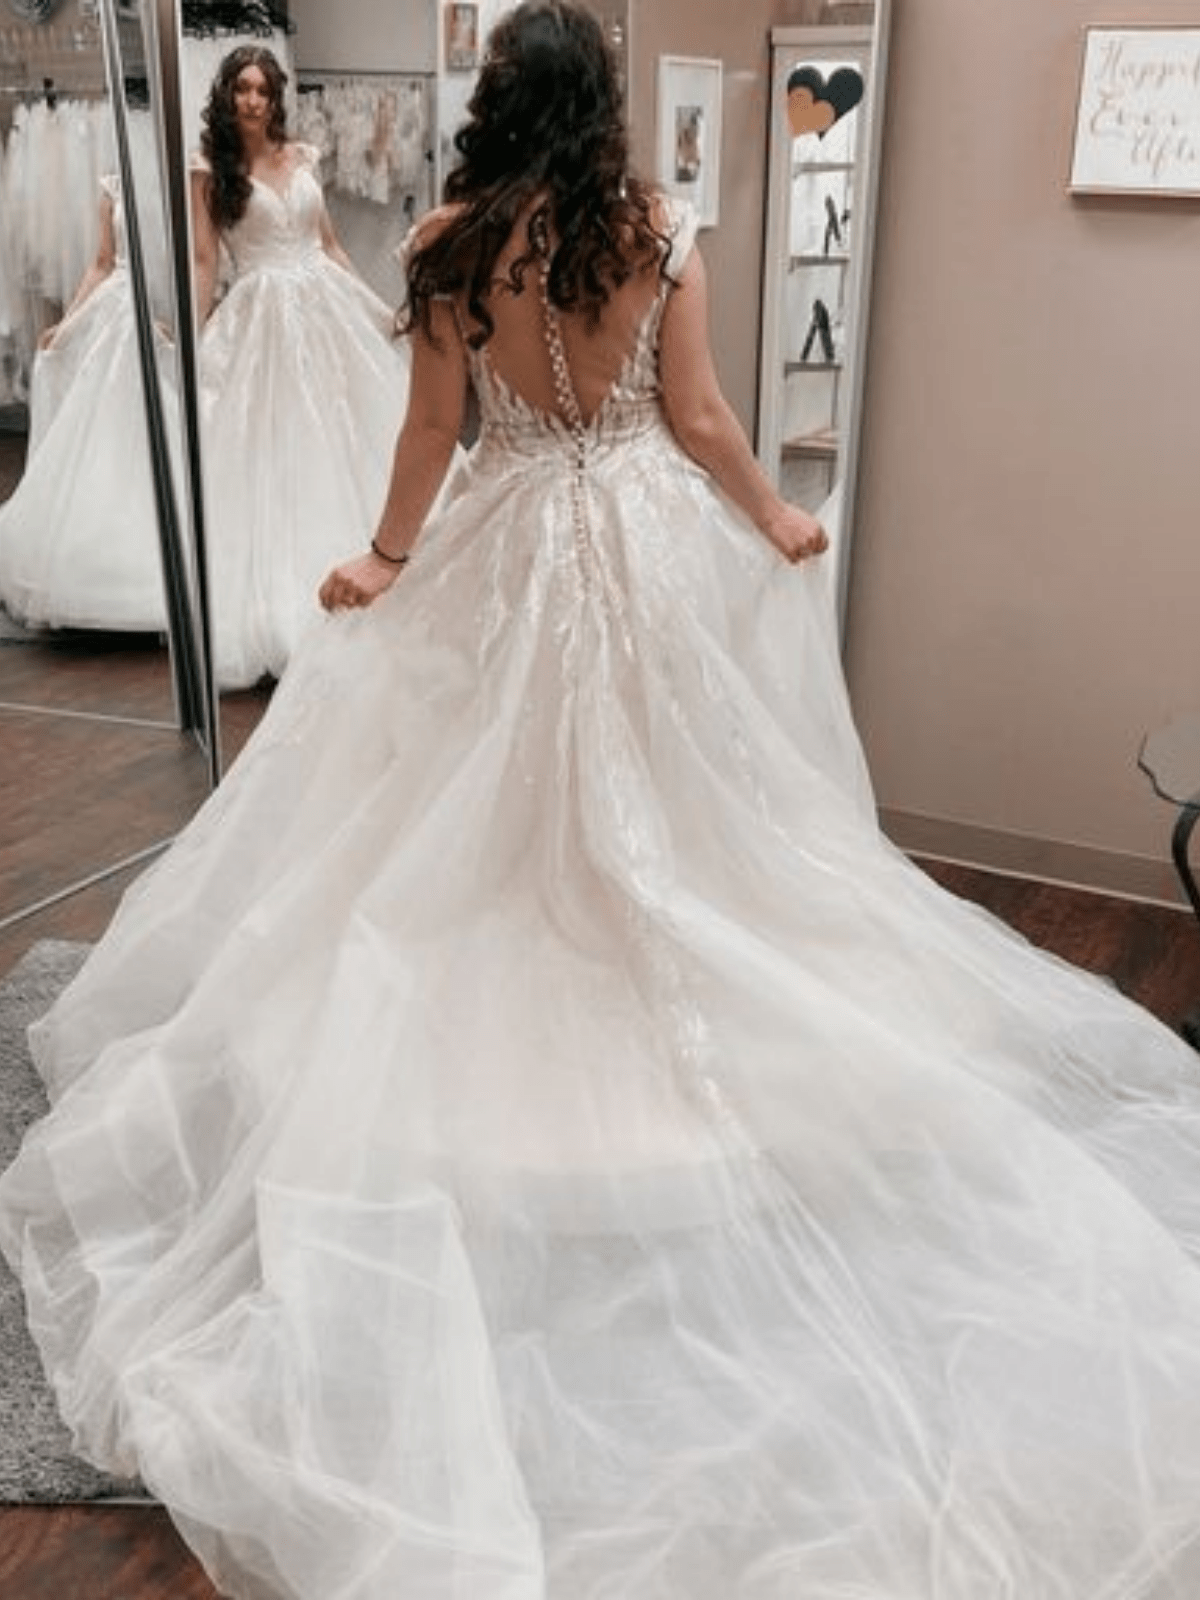 Wedding Gown in Maple Grove MN